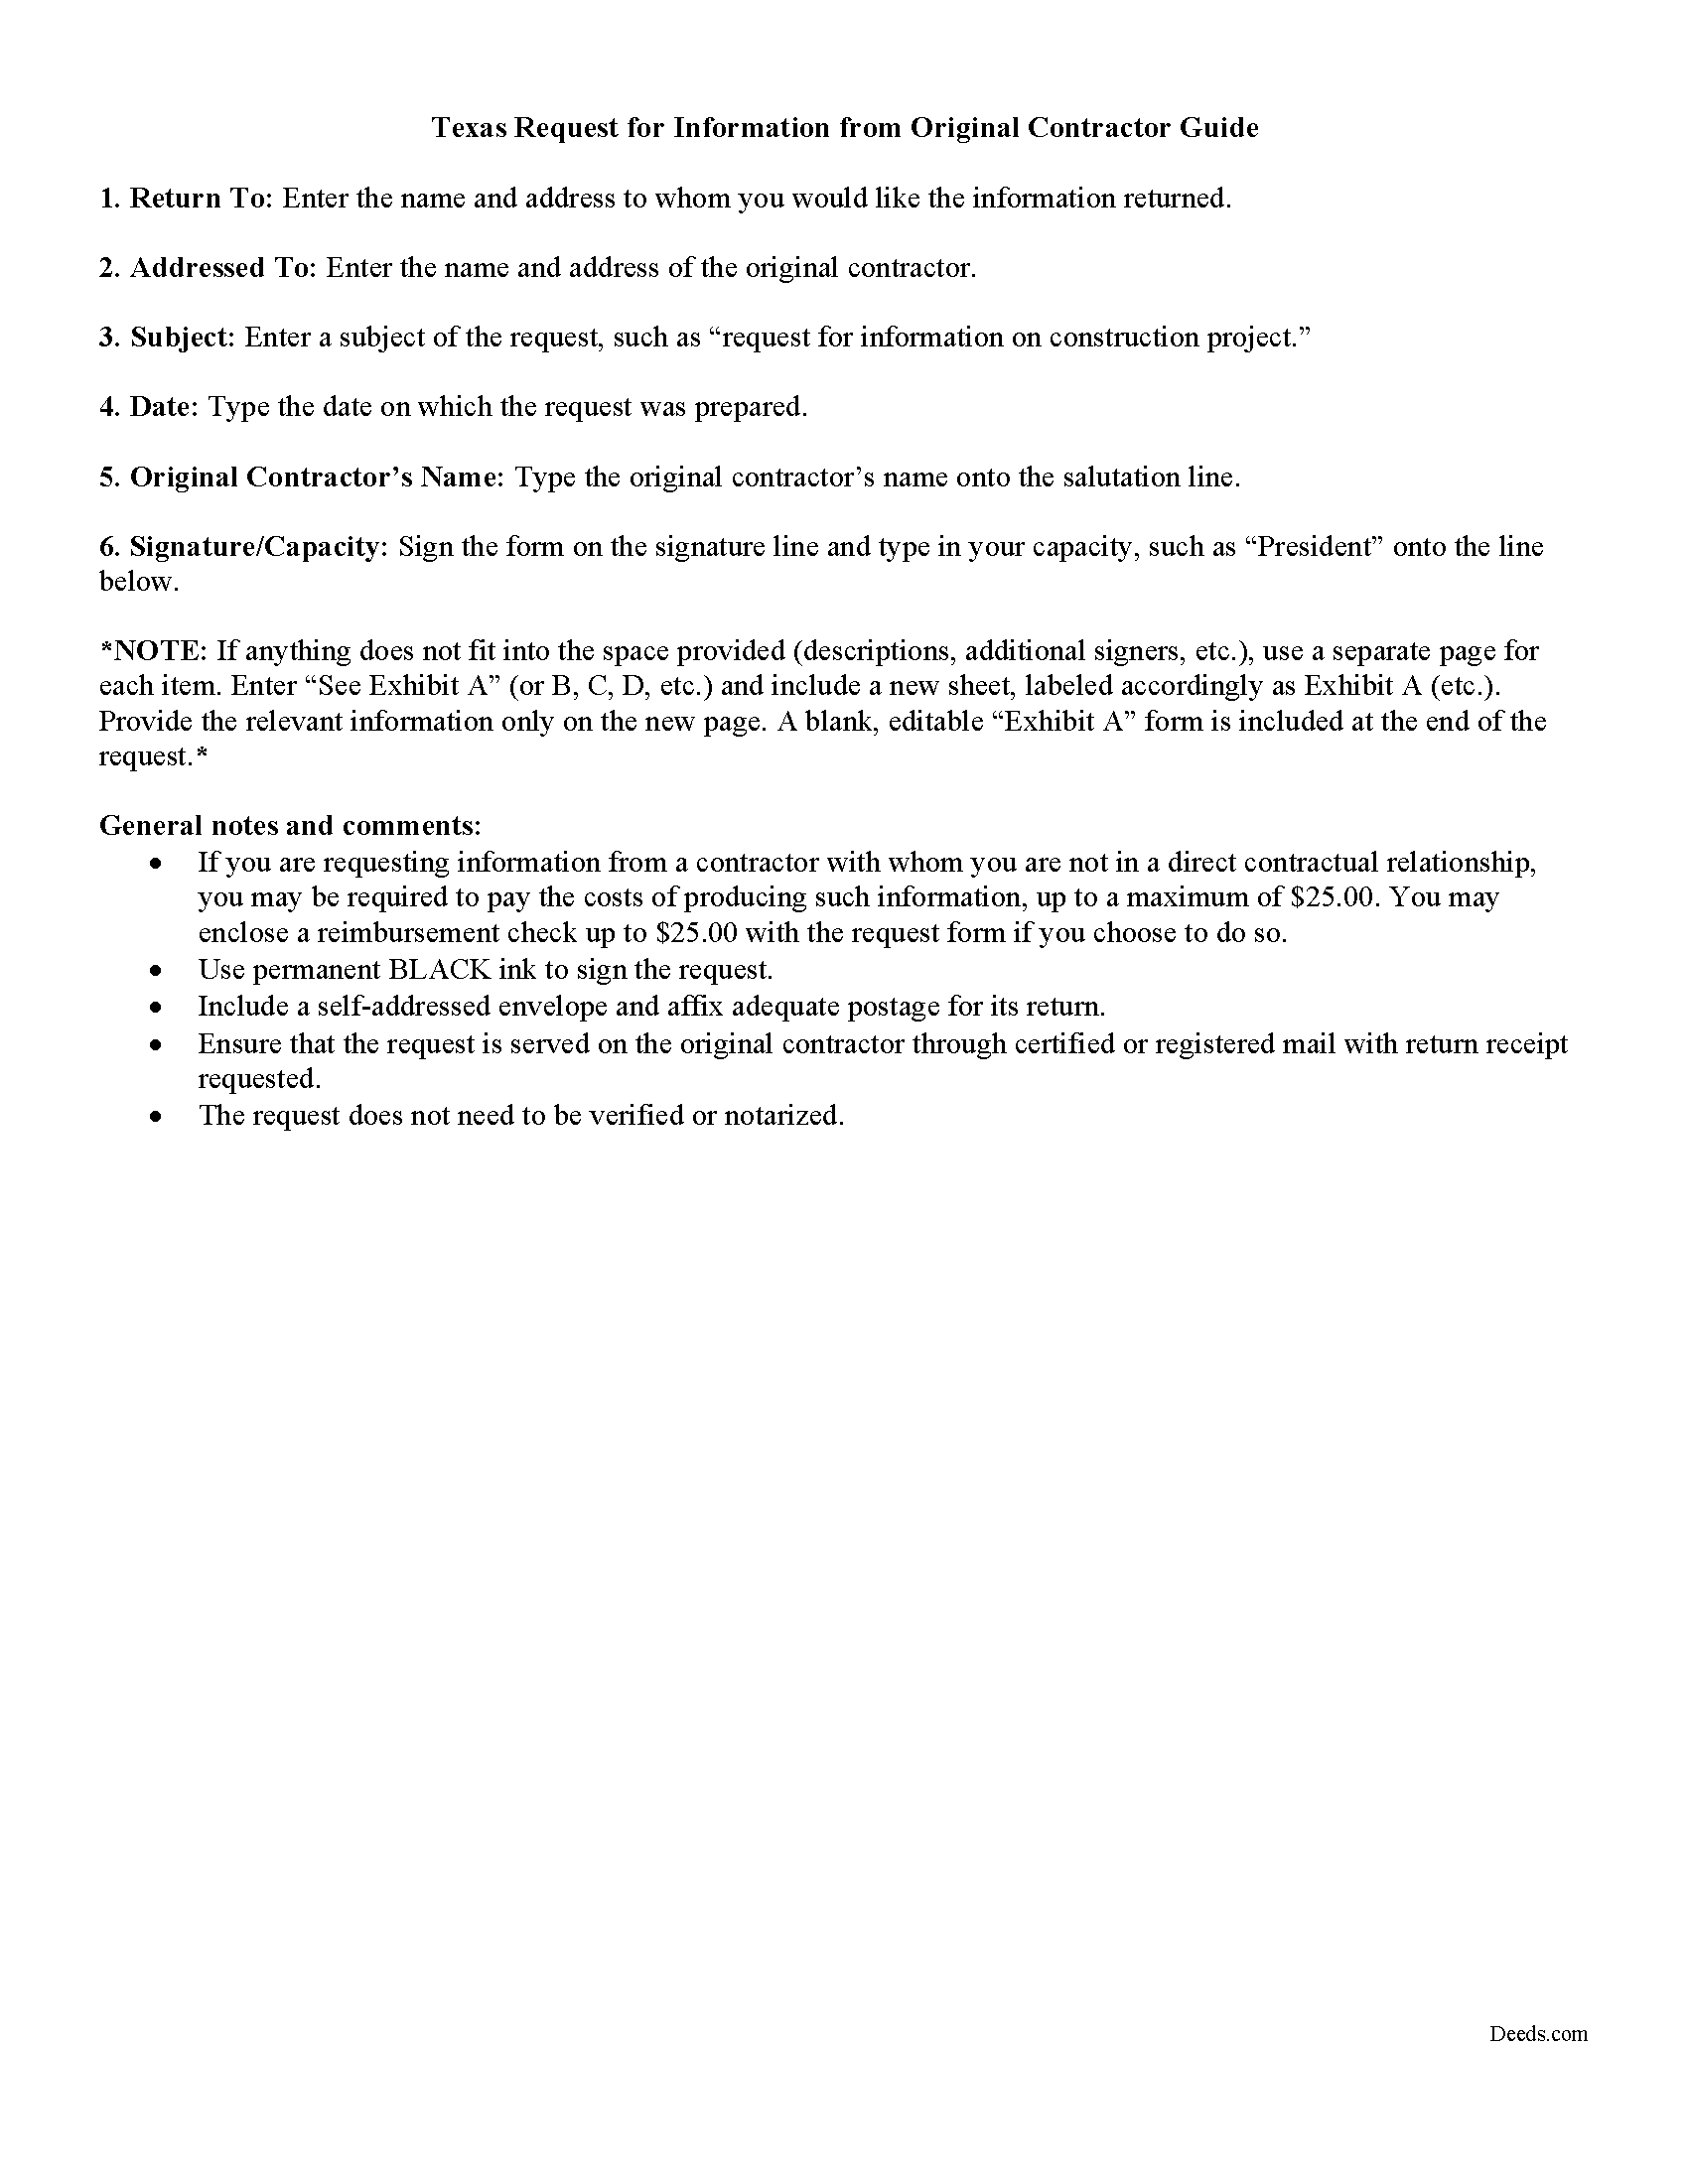 Request for Information from Original Contractor Guide